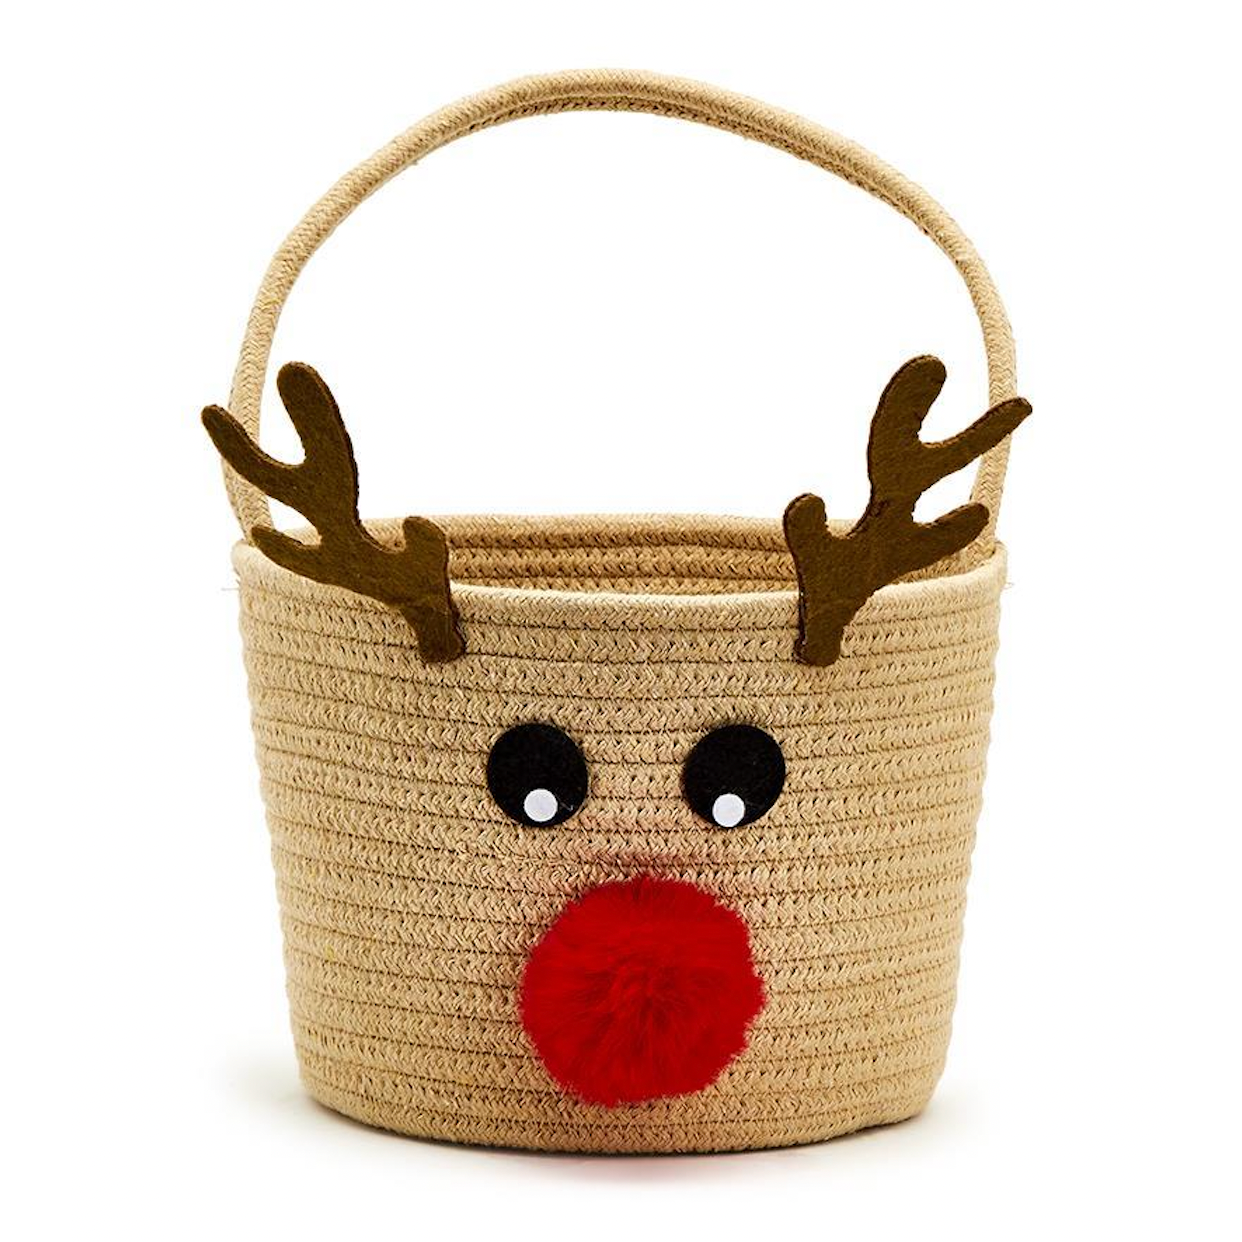 Cupcakes & Cartwheels Holiday Cheer Hand-Crafted Decorative Baskets-CUPCAKES & CARTWHEELS-Little Giant Kidz